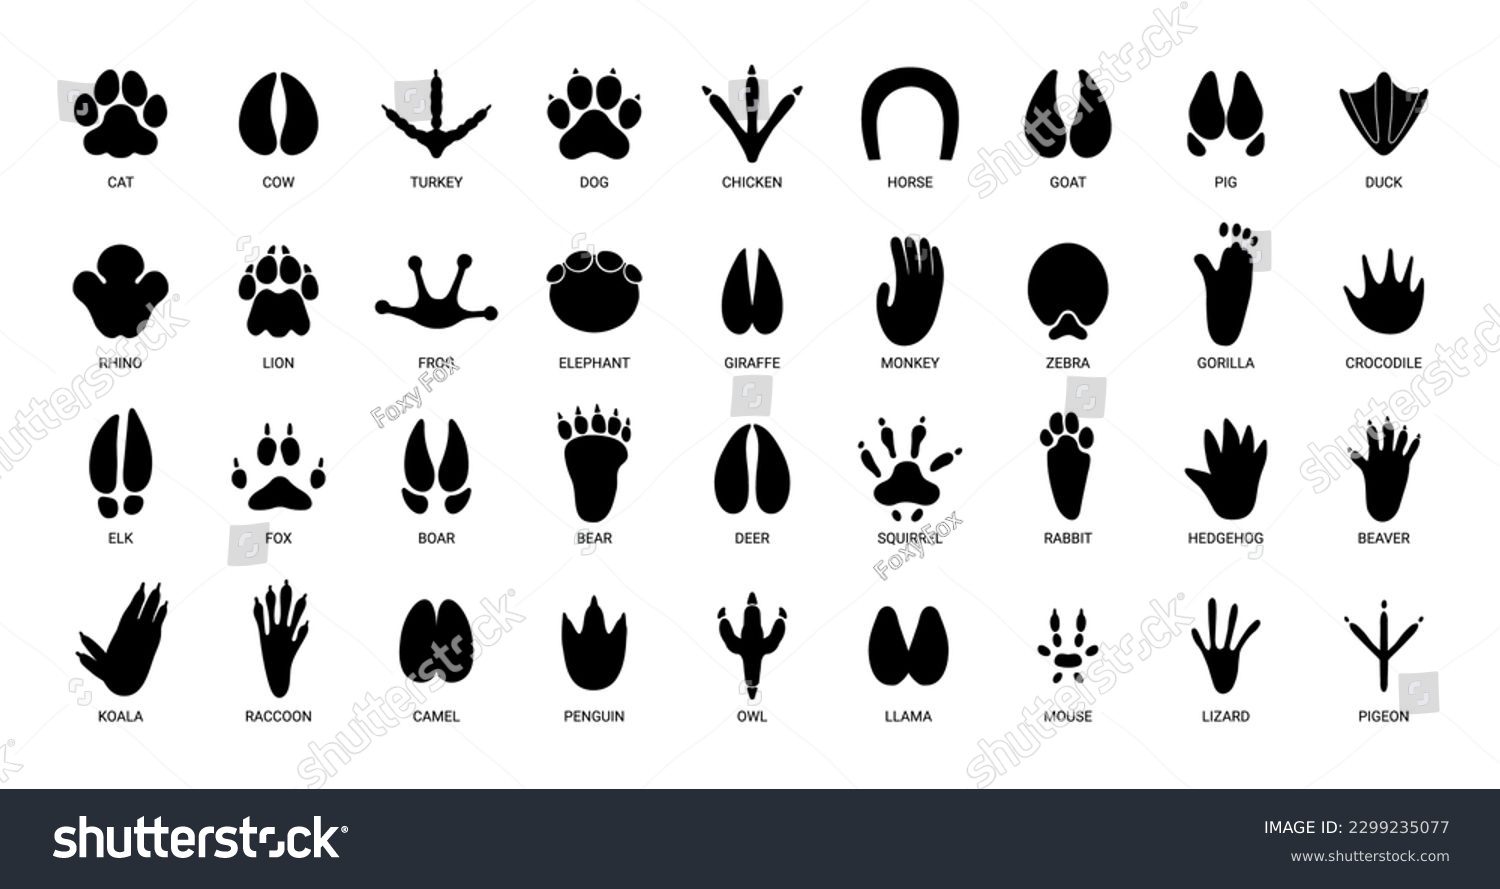 SVG of Animals footprints. Prints animal bird paw, wildlife foot icon, domestic pets footstep silhouette, print hoofed feet, black amphibia feet track vector set. Cat, turkey, chicken and horse trail svg